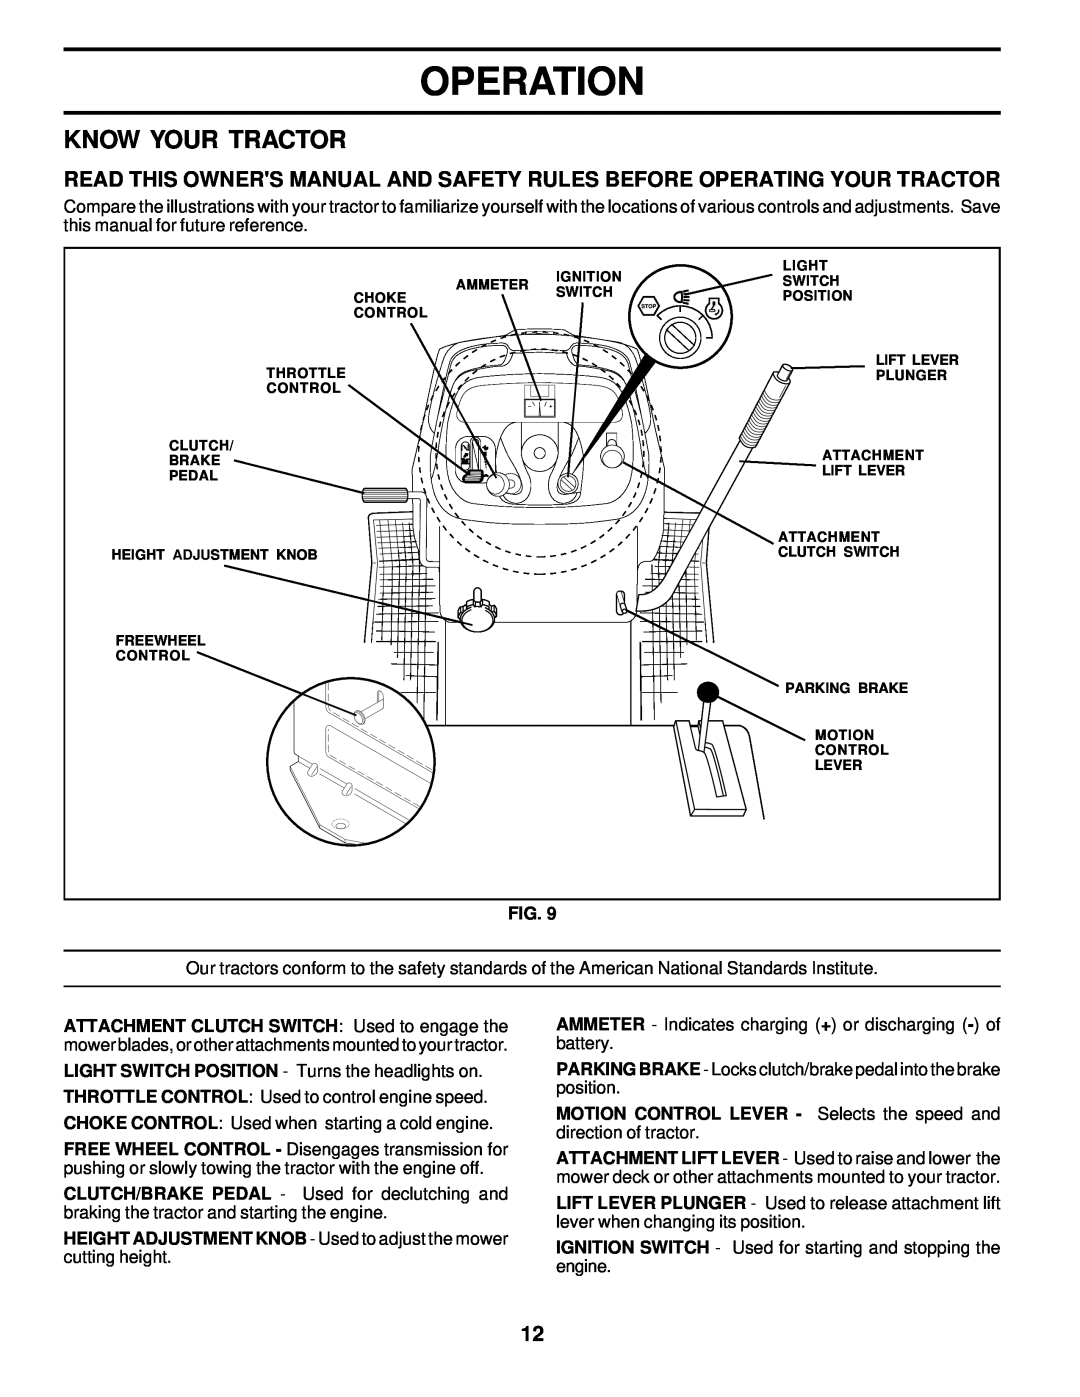 Poulan 178249 owner manual Know Your Tractor, Operation, HEIGHT ADJUSTMENT KNOB - Used to adjust the mower cutting height 